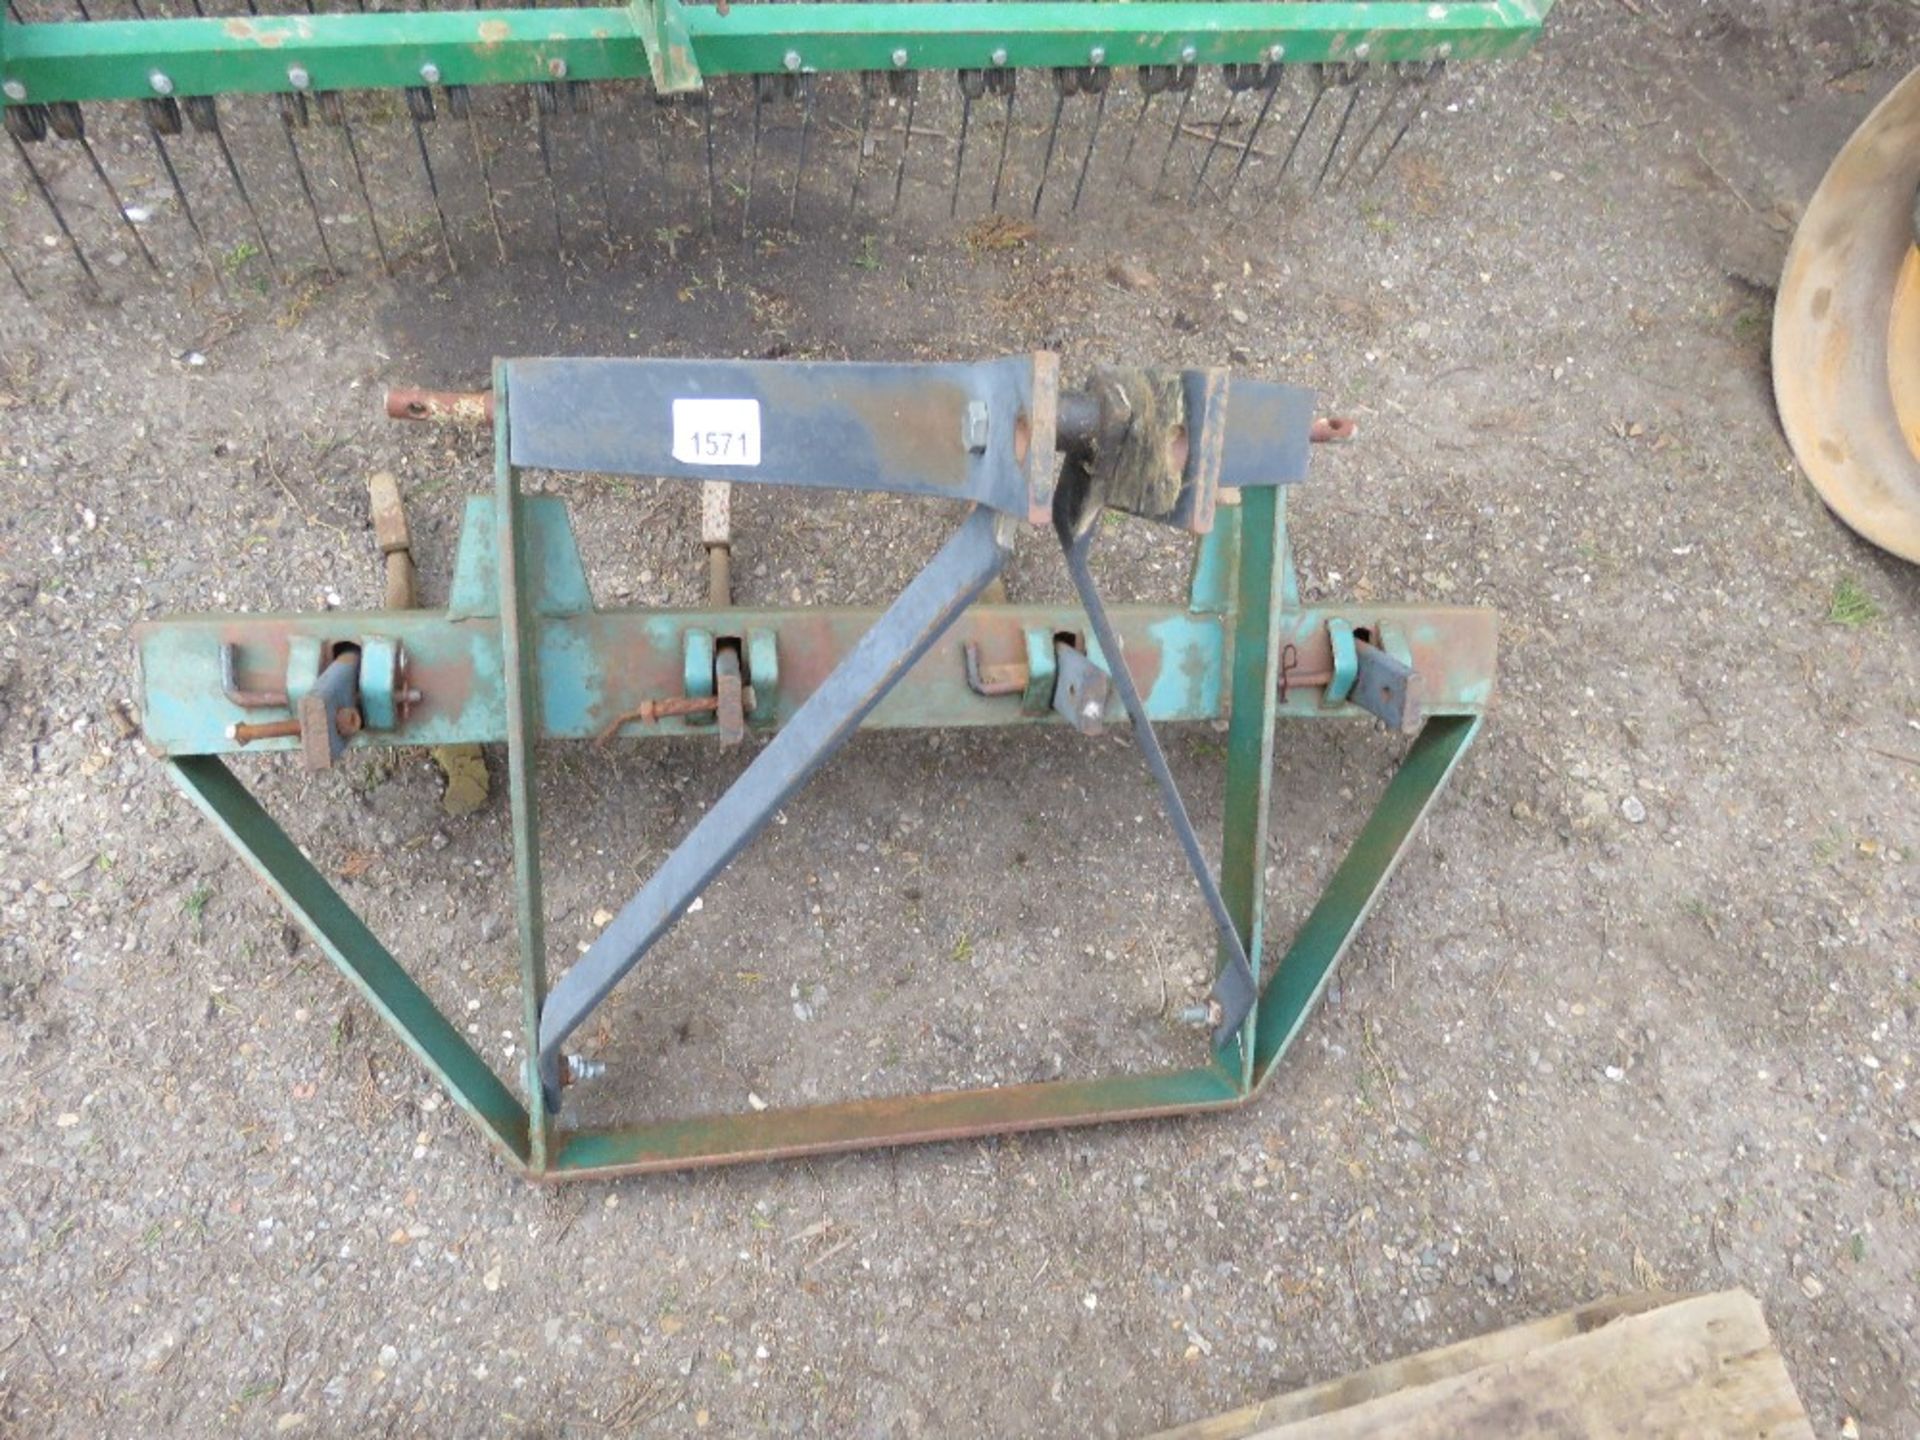 HEAVY DUTY 4 TINE RIPPER ATTACHMENT FOR SMALL TRACTOR, 4FT OVERALL WIDTH APPROX. 6NO PALLETS OF IBST